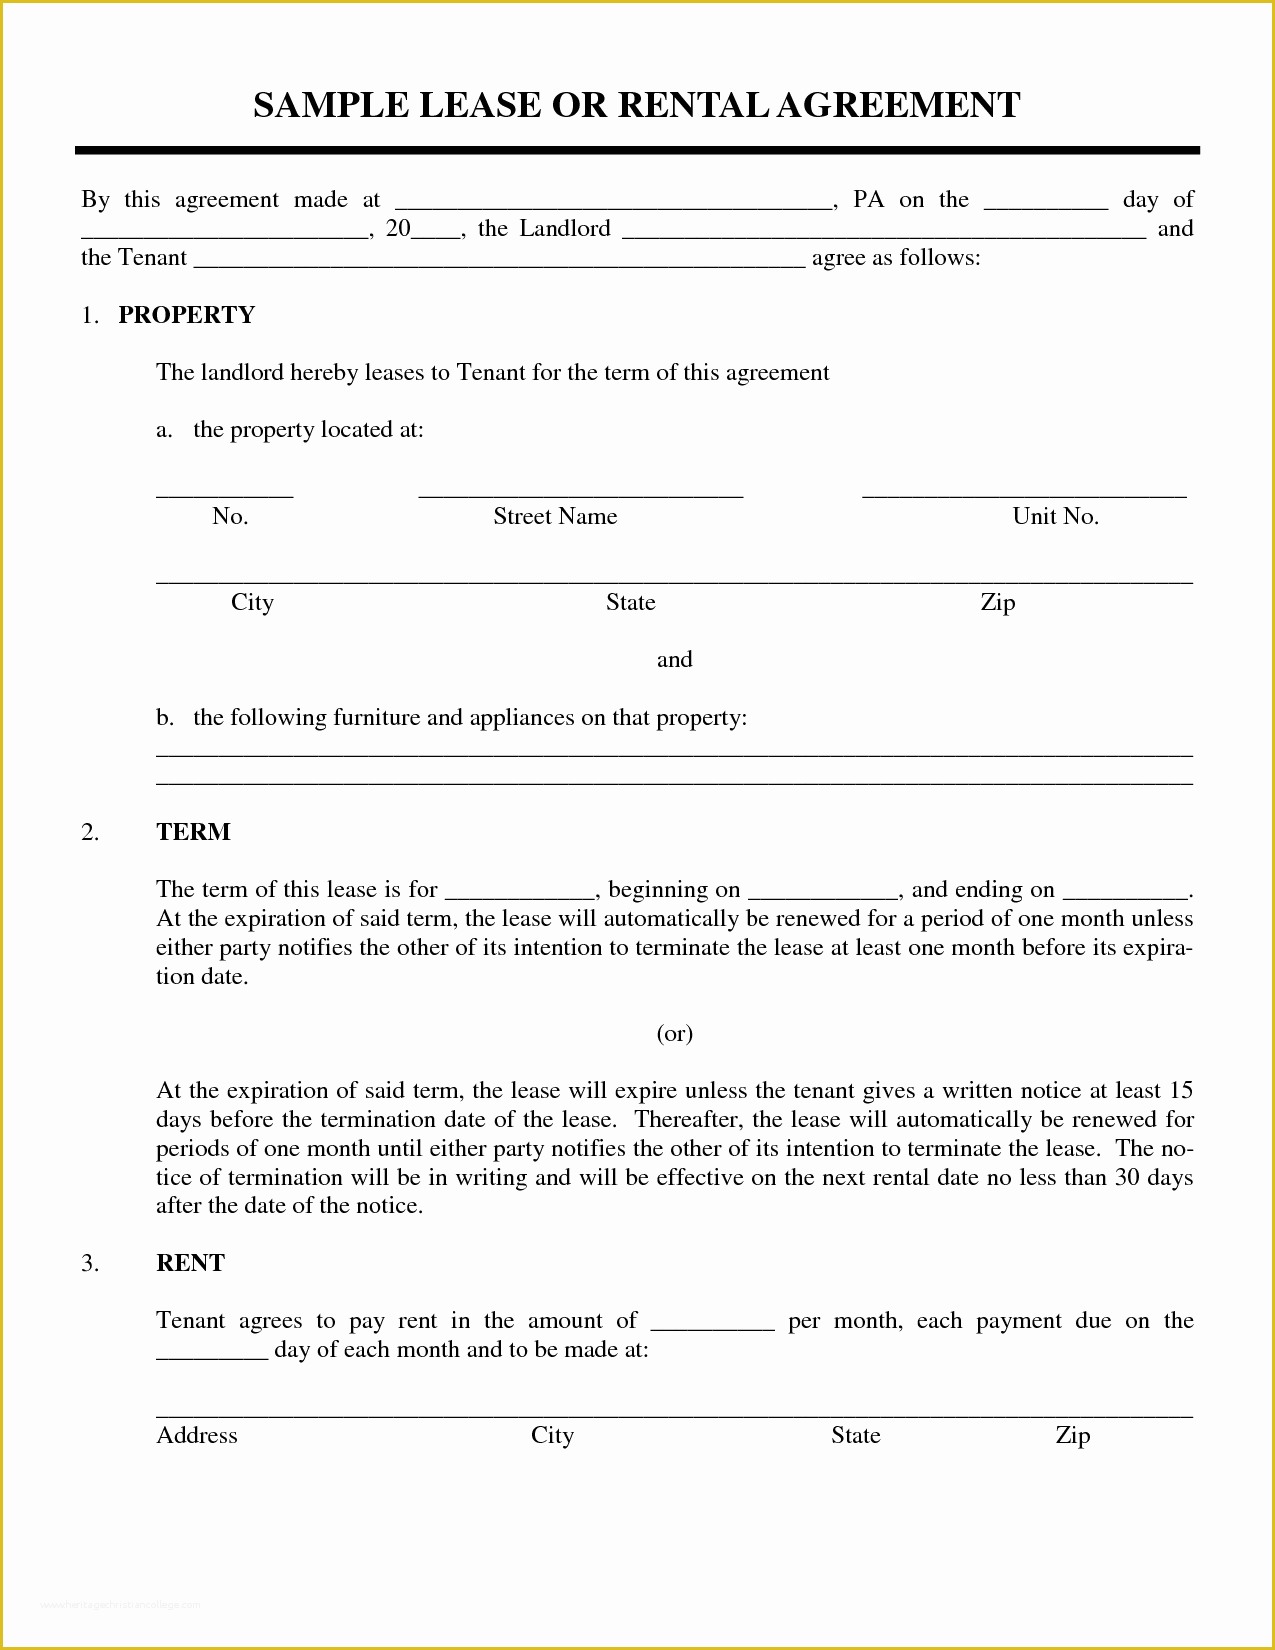 Free House Rental Agreement Template Of Sample Lease or Rental Agreement